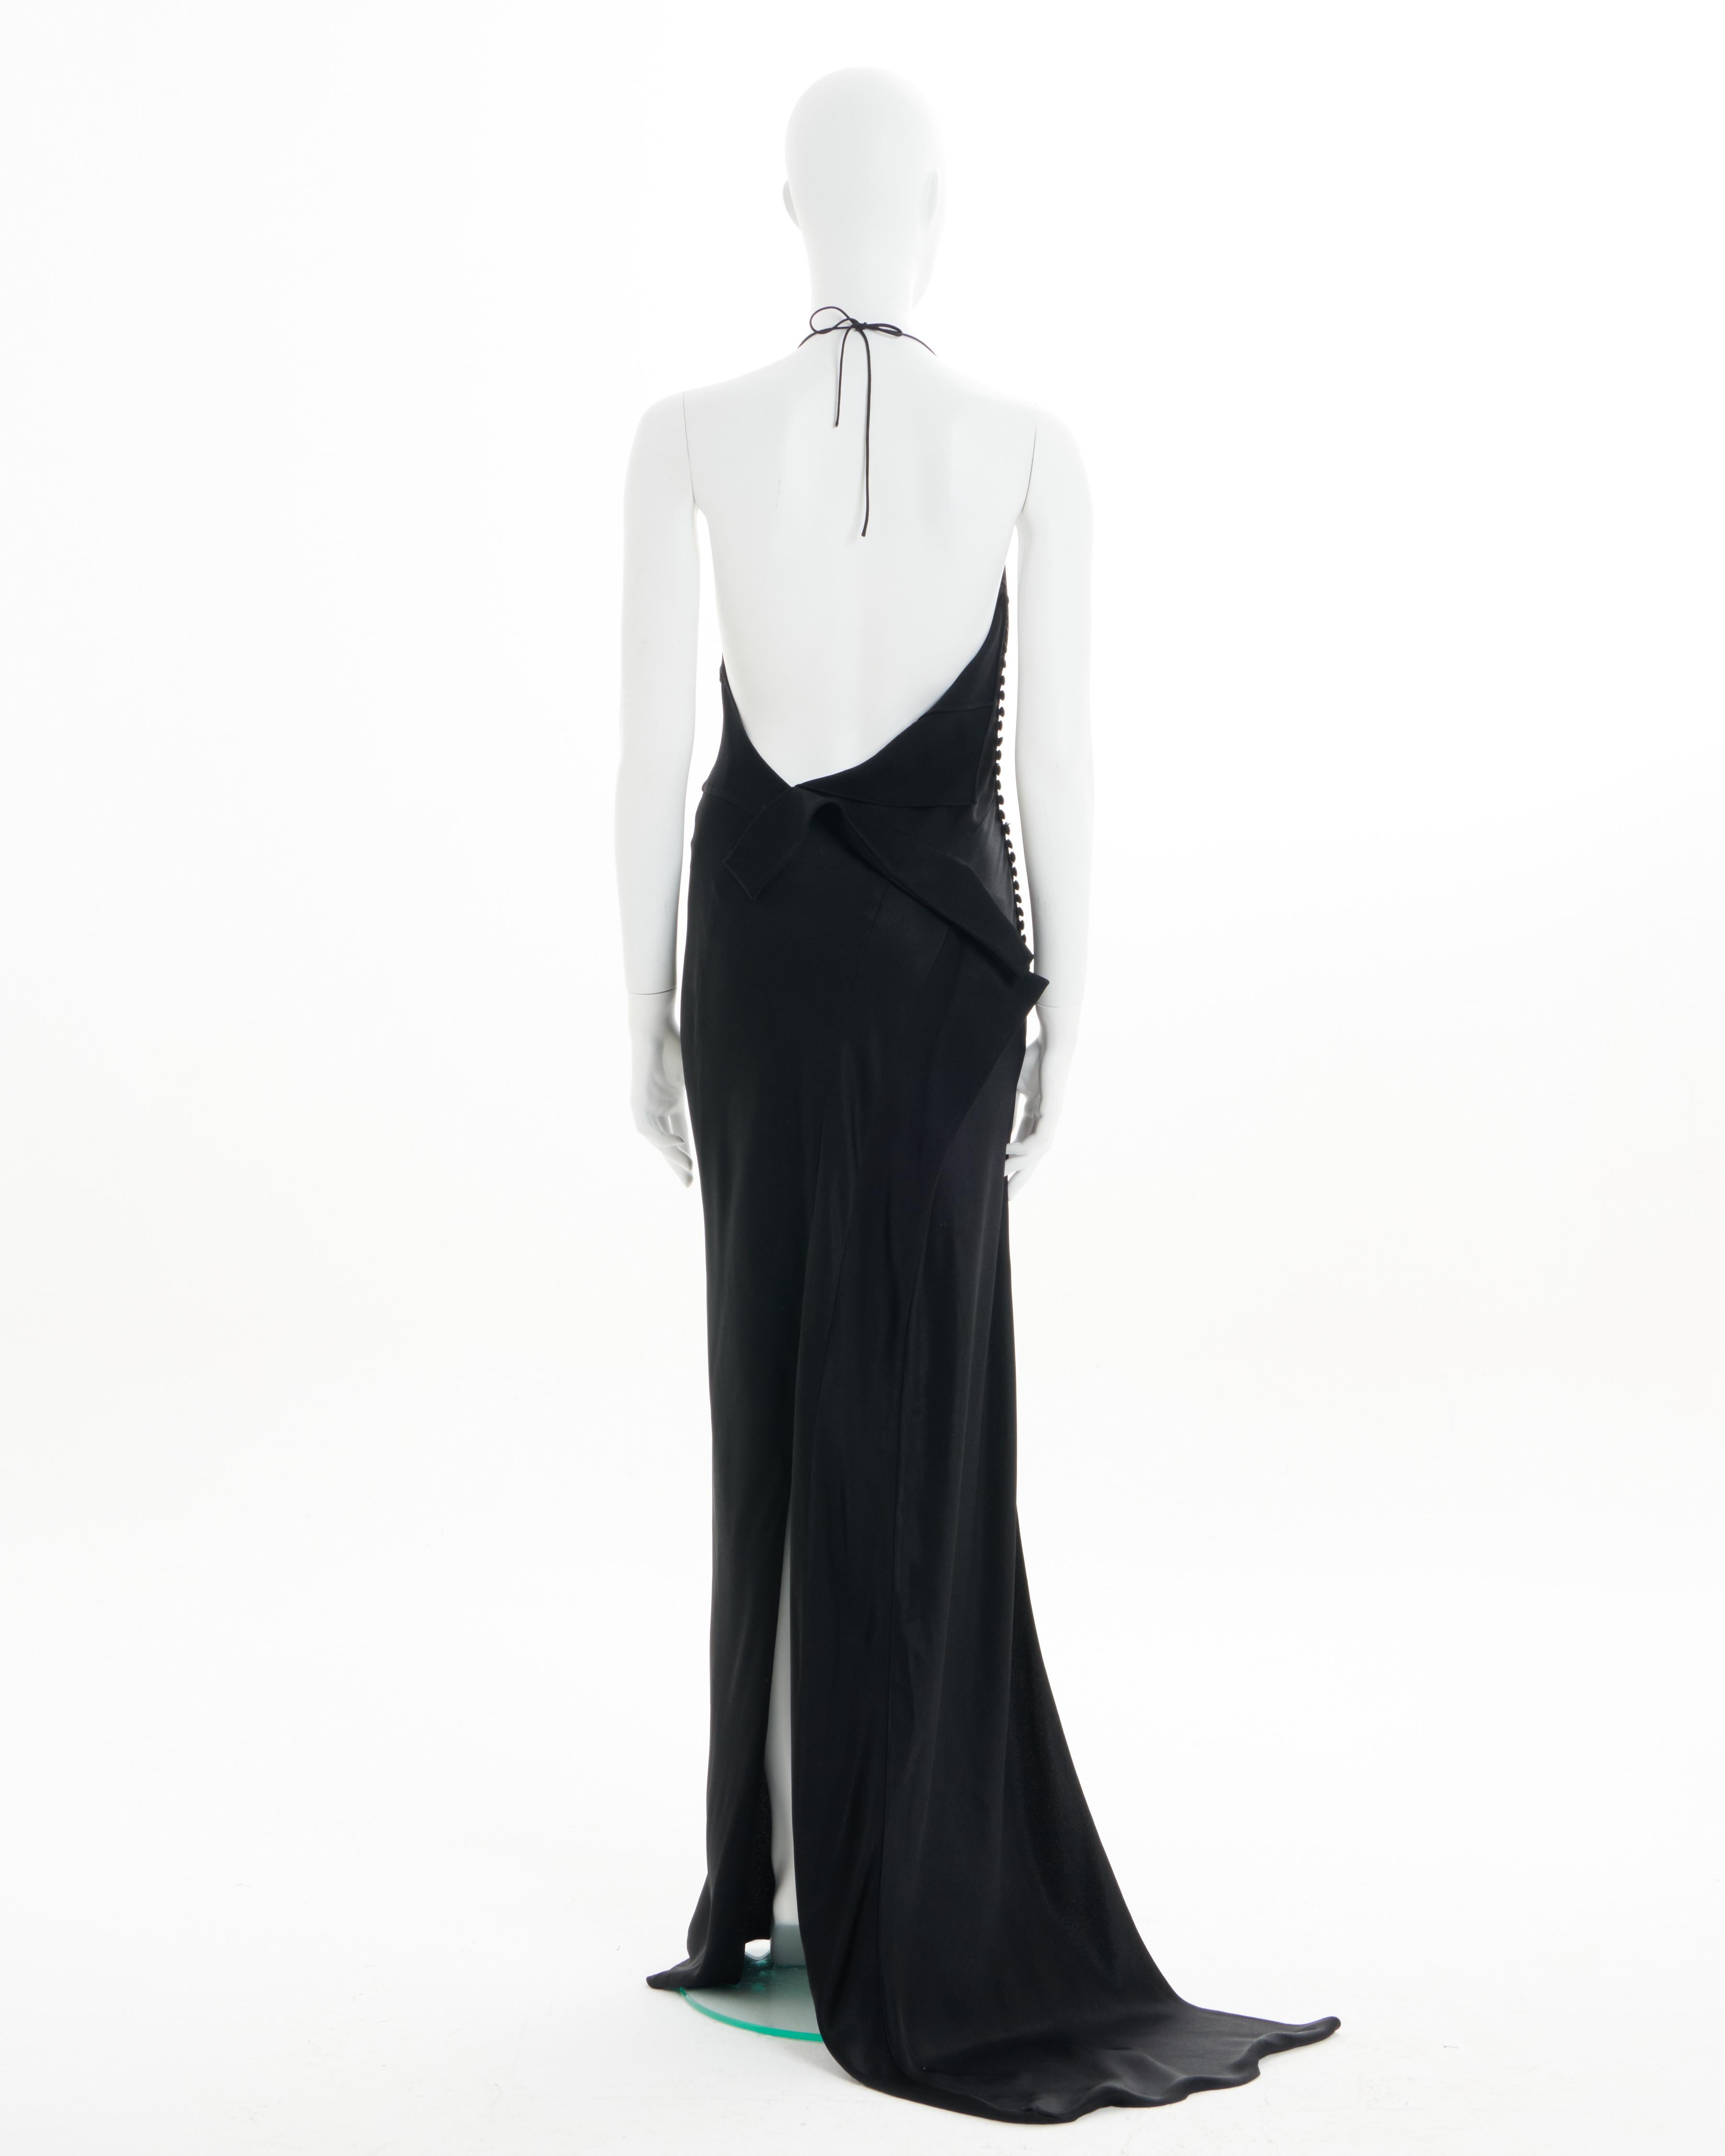 Christian Dior by John Galliano F/W 2000 Black bias-cut trained evening dress In Excellent Condition For Sale In Milano, IT